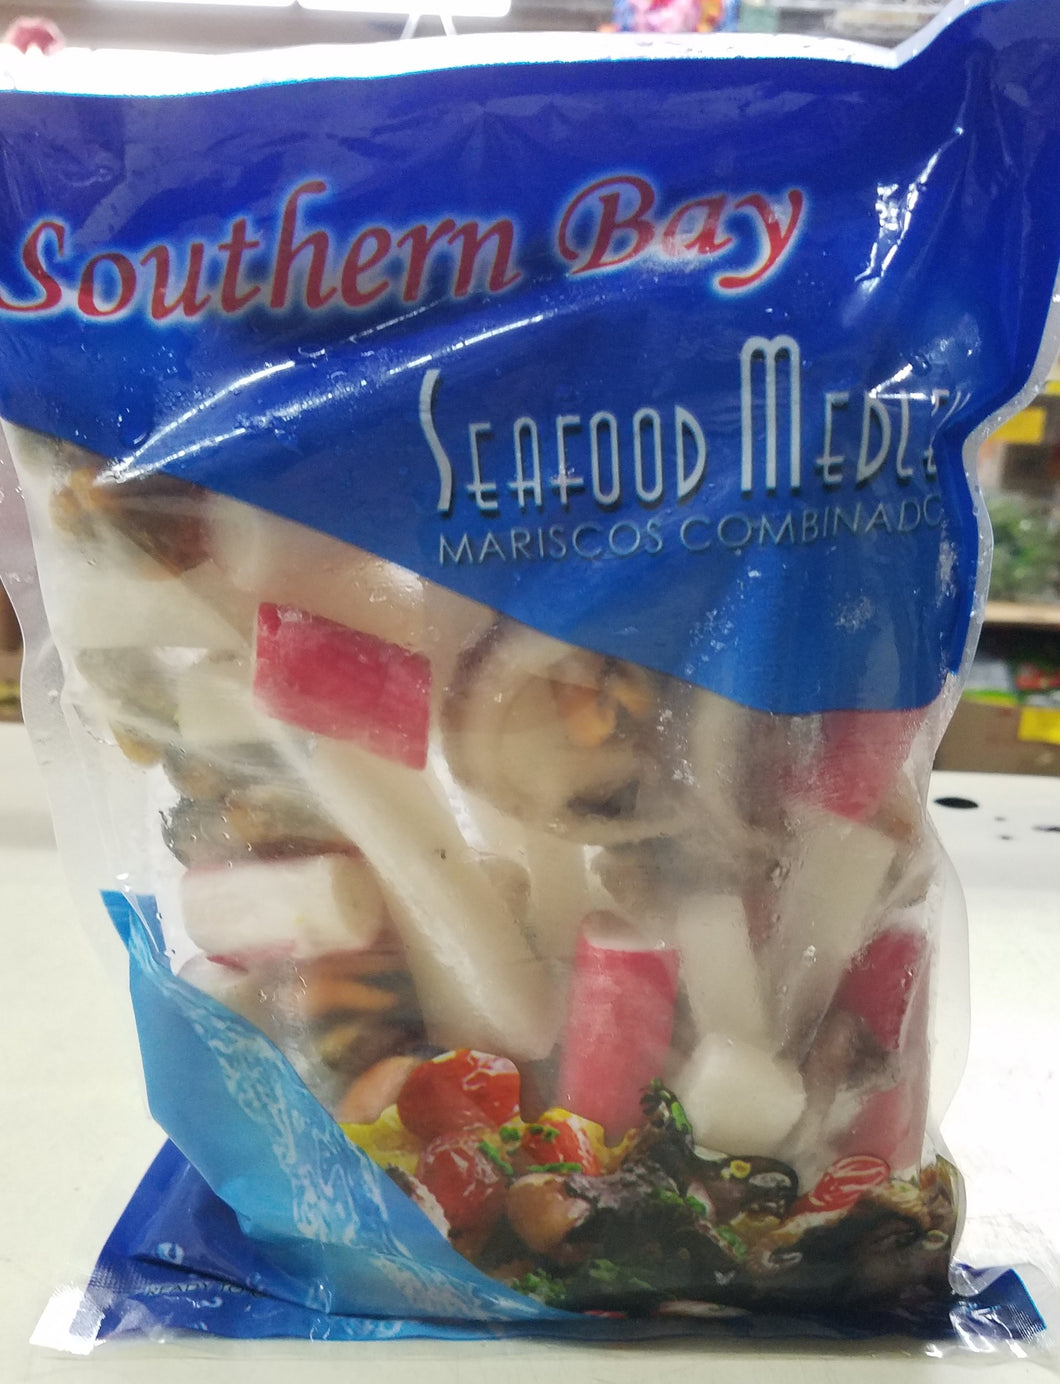 Southern Bay Seafood Medley